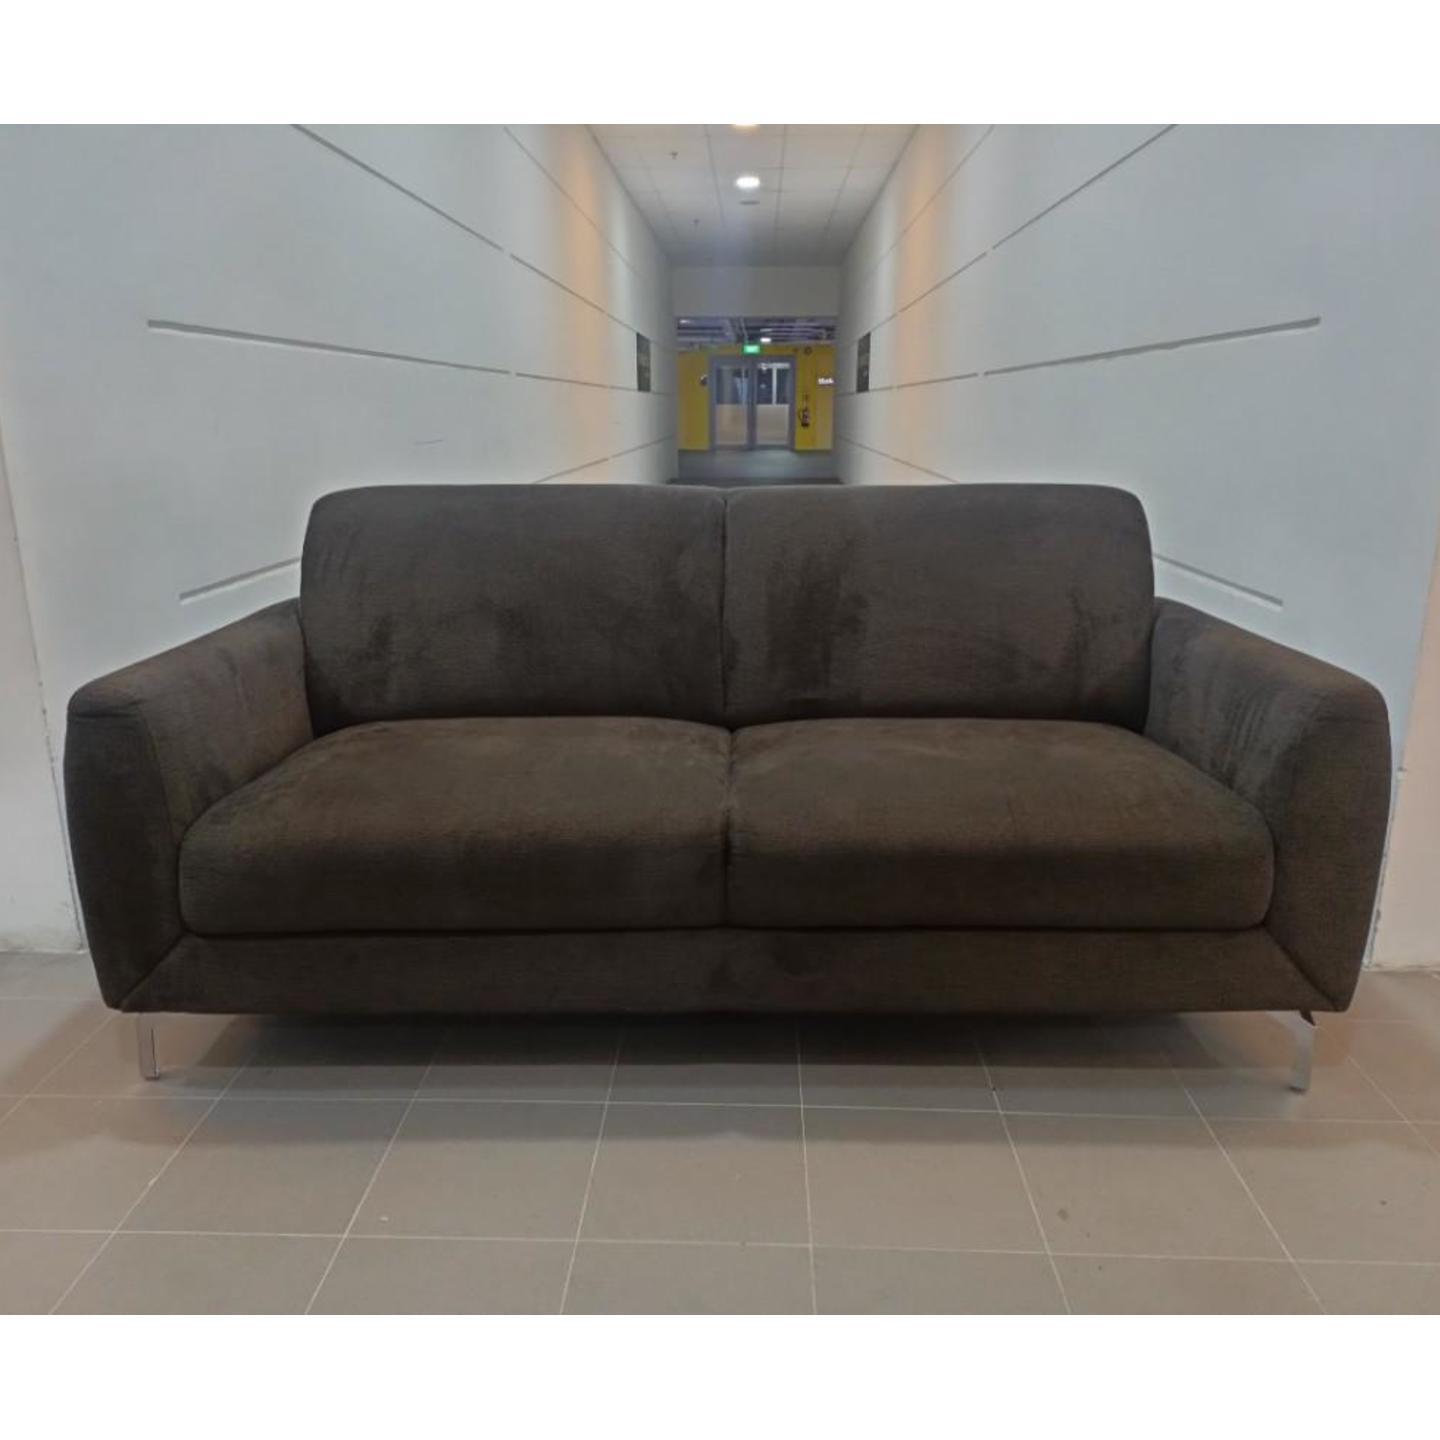 MINOTAURA 3 Seater Sofa in CHEWY BROWN FABRIC